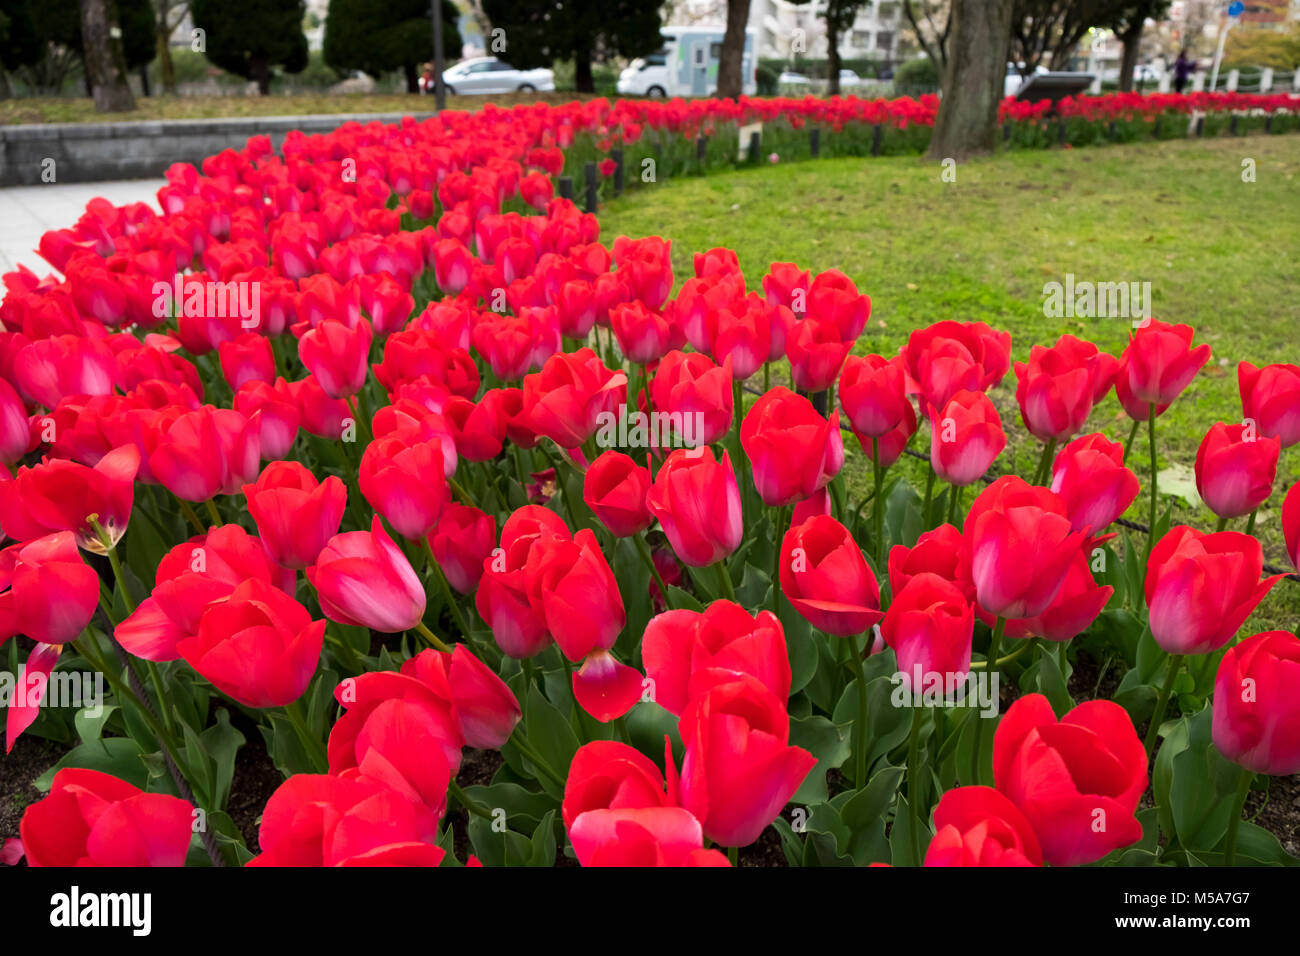 Red Tulips in a border in a public city park Stock Photo